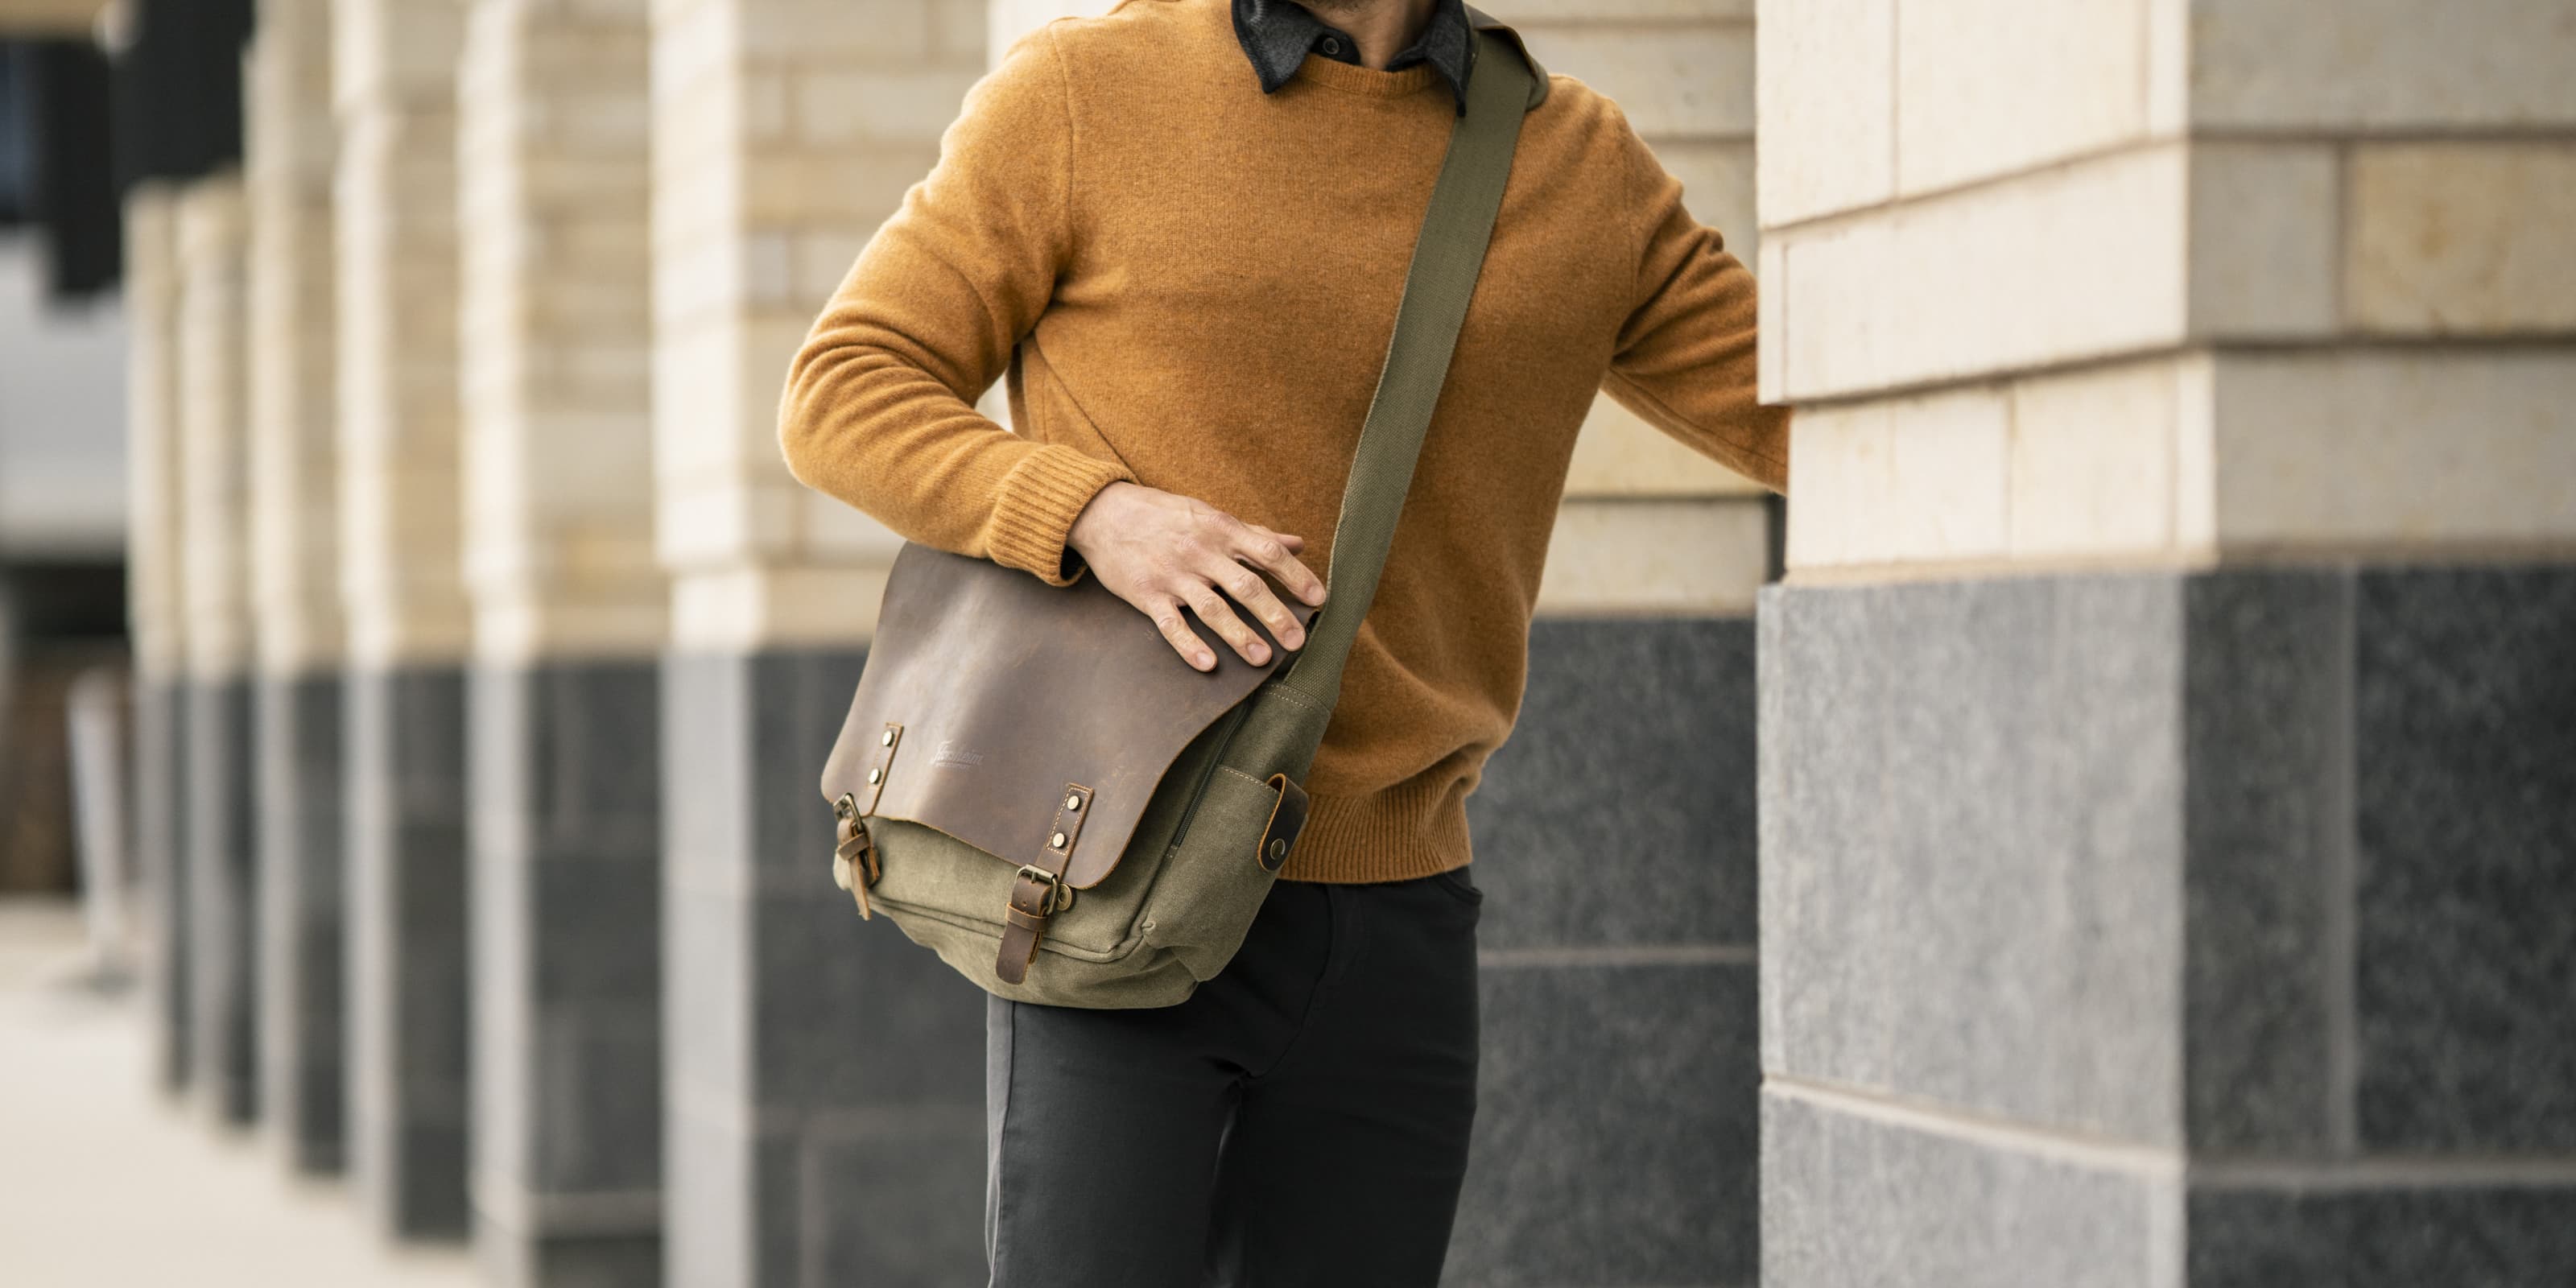 The featured image is a model opening a door while wearing a stylist sweater and crossbody bag.